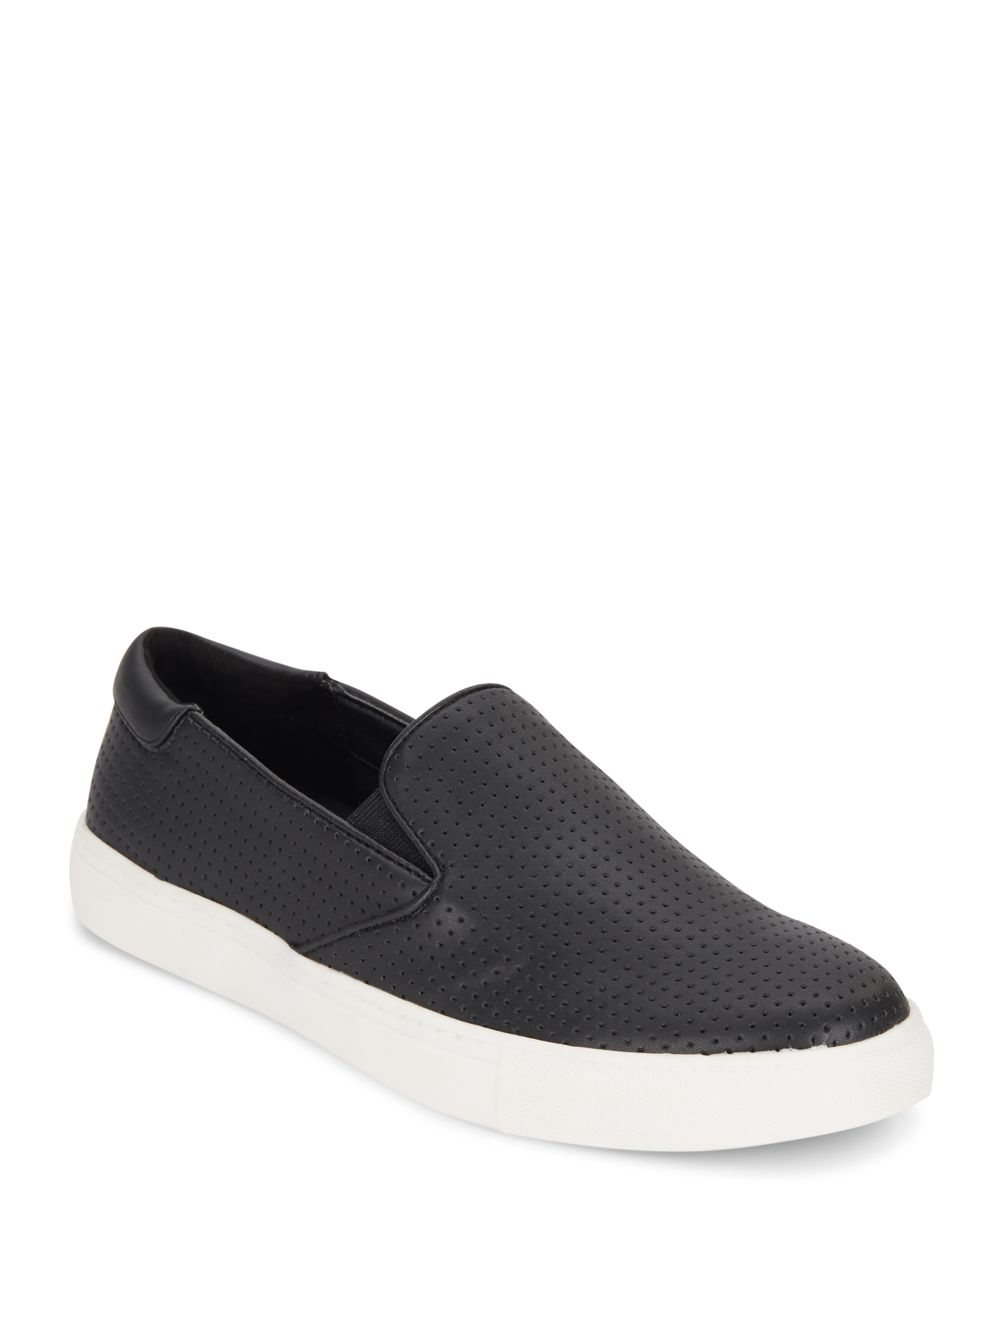 kenneth cole reaction slip on shoes